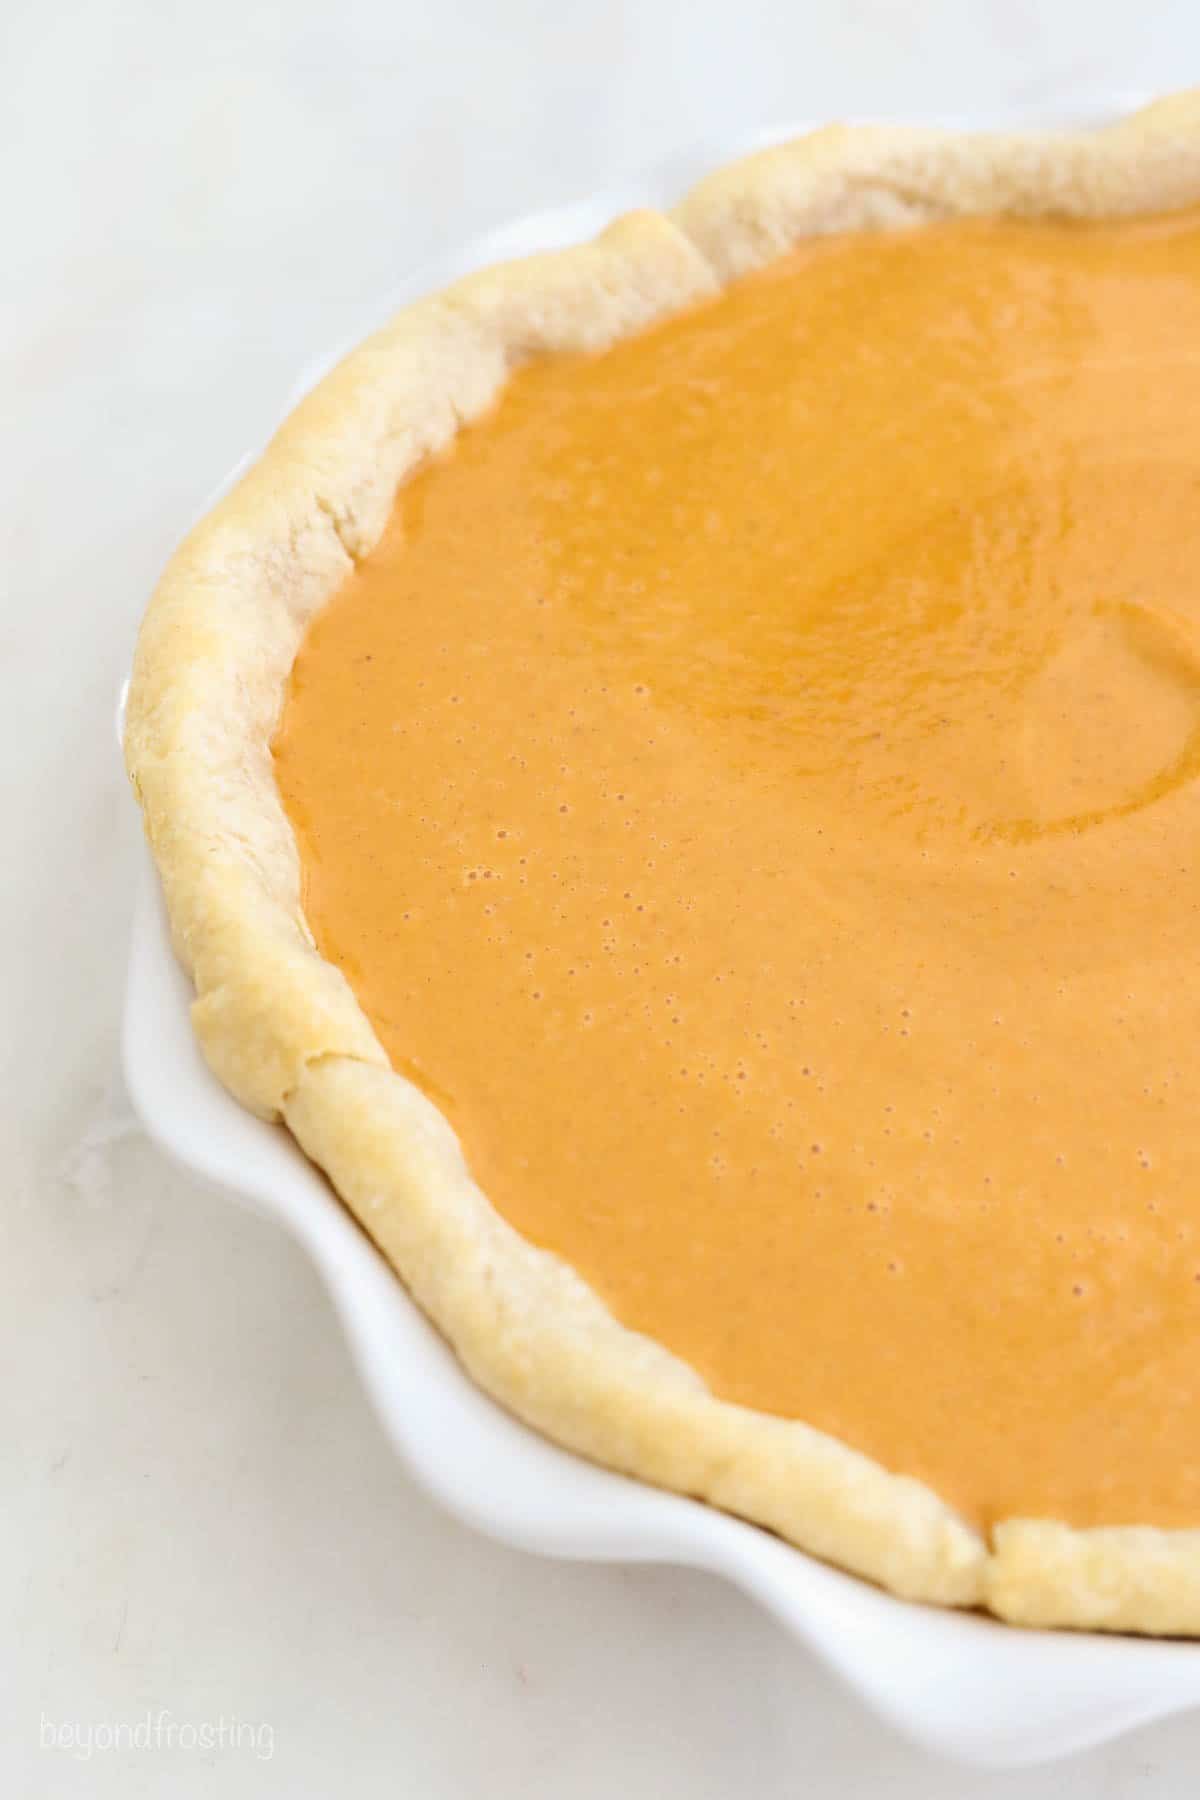 The unbaked pie with the partially baked crust and raw pumpkin filling.